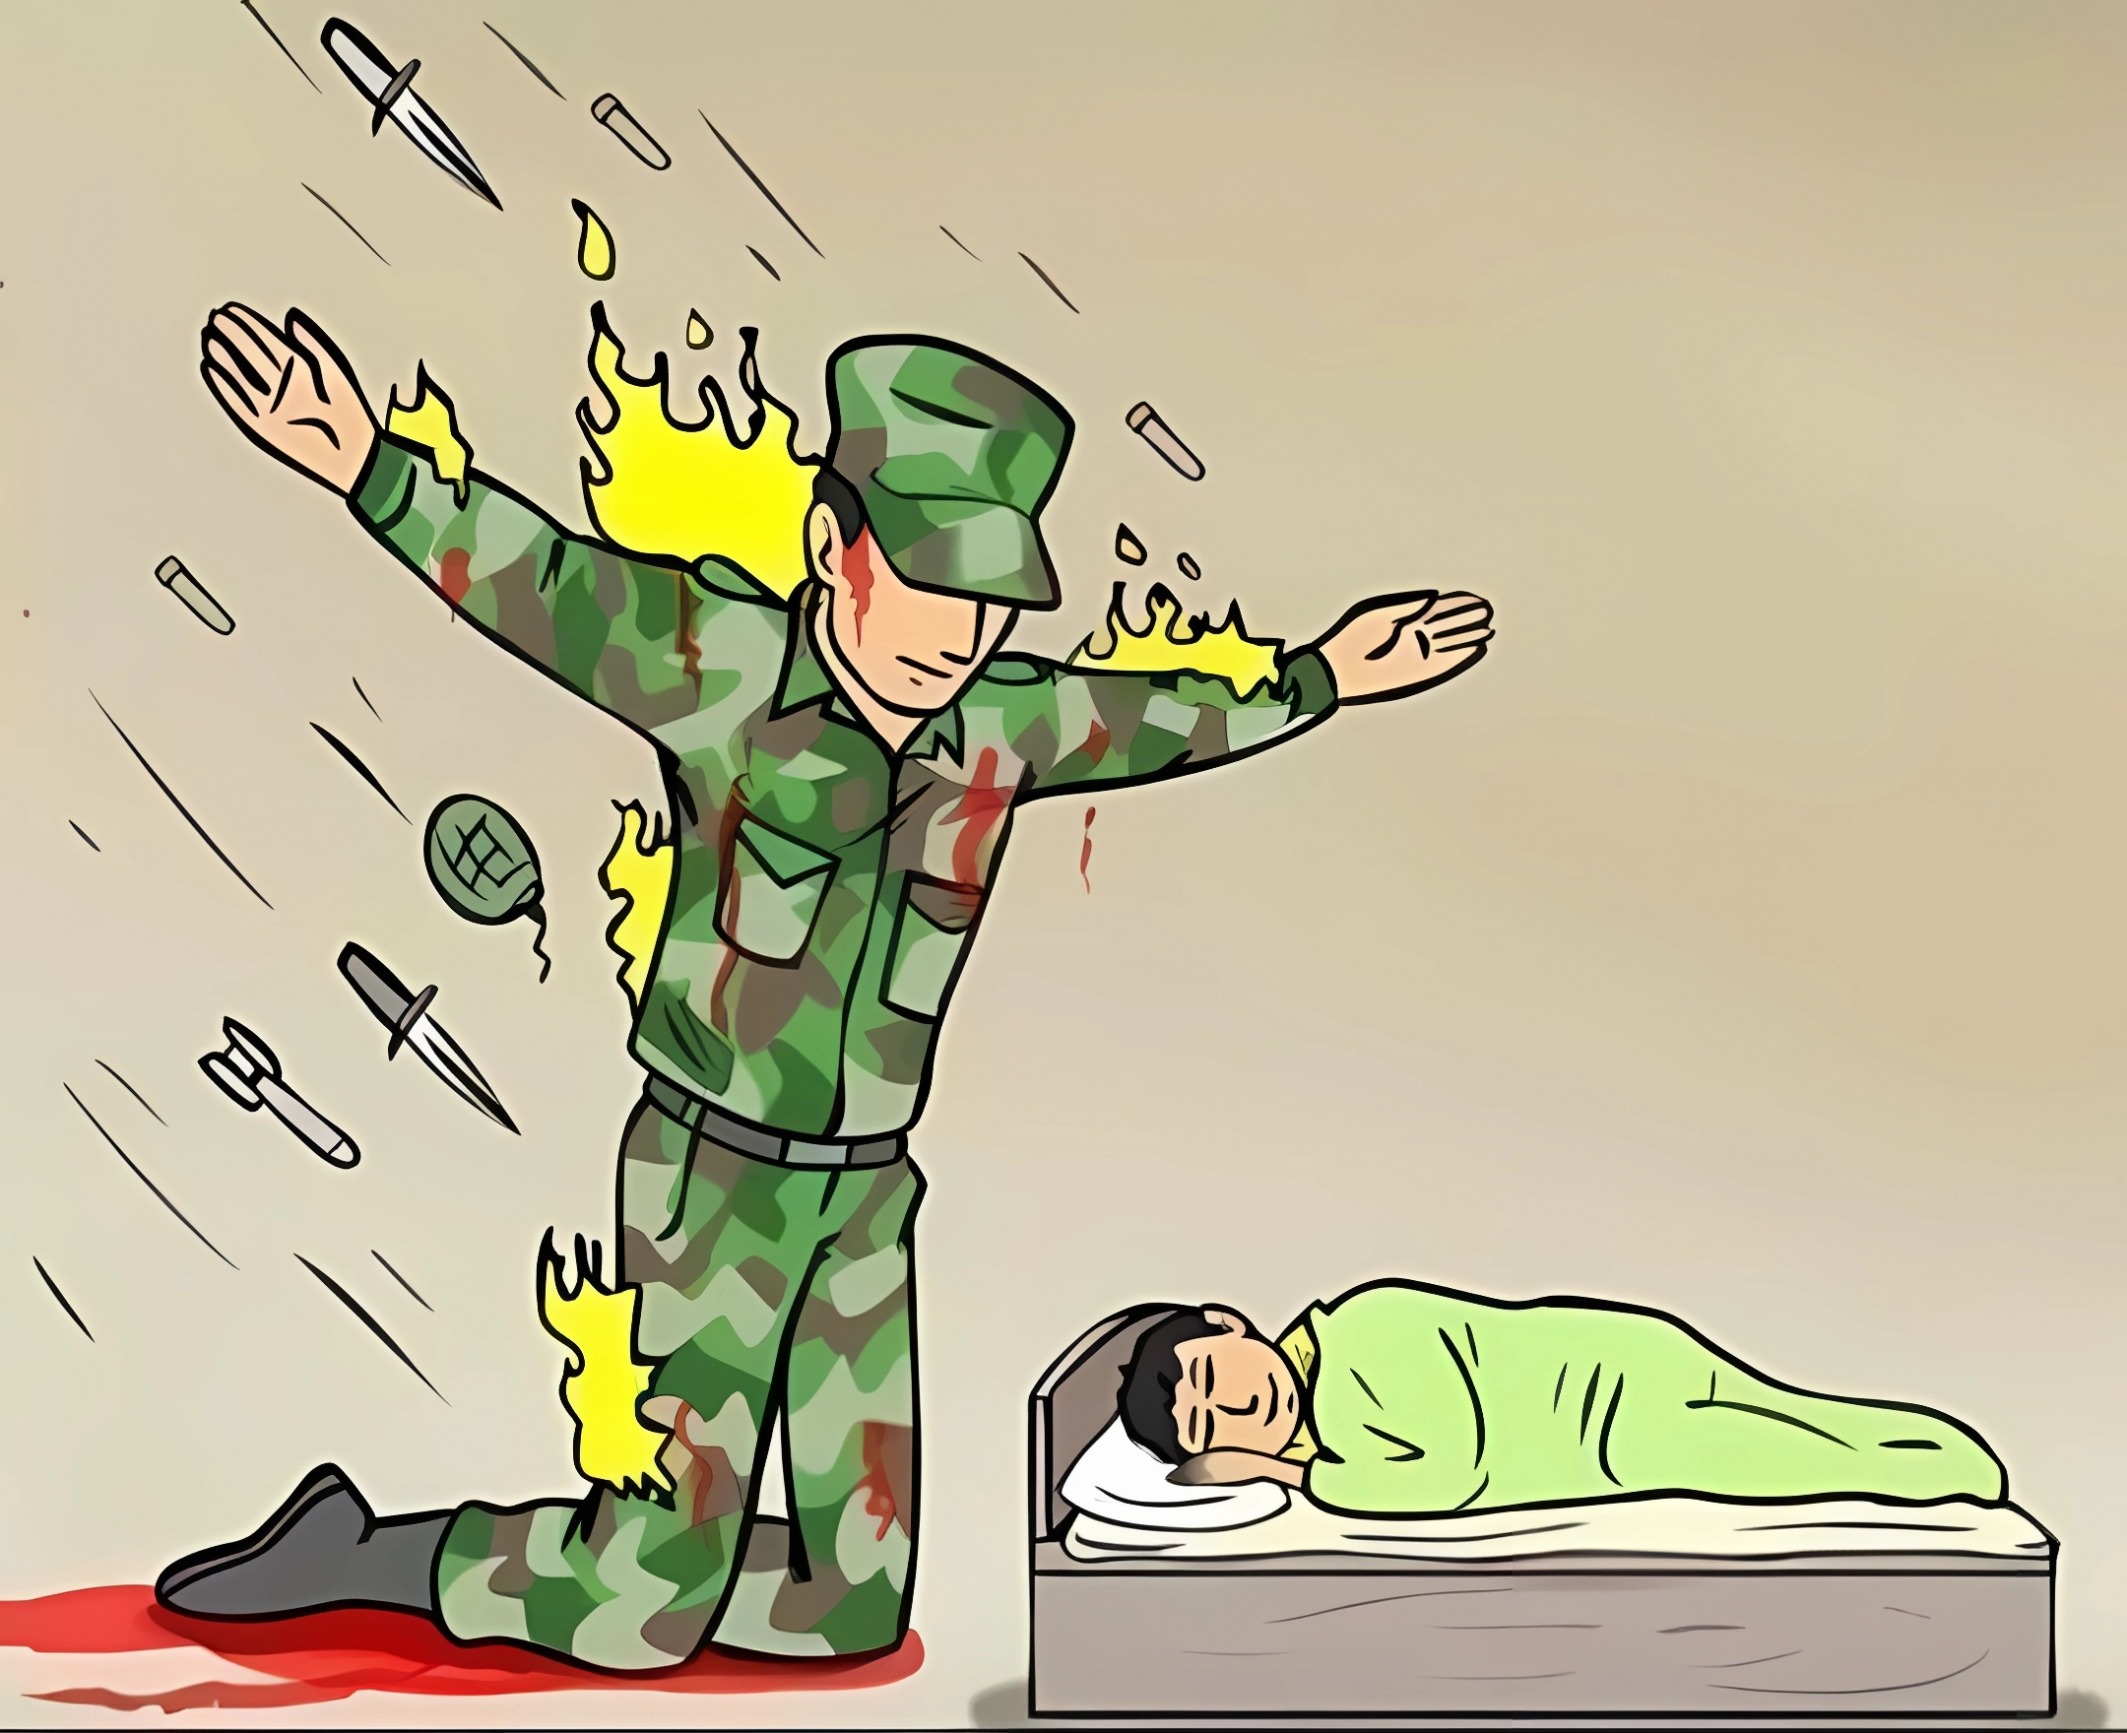 Soldier protecting sleeping child (HQ) Blank Meme Template